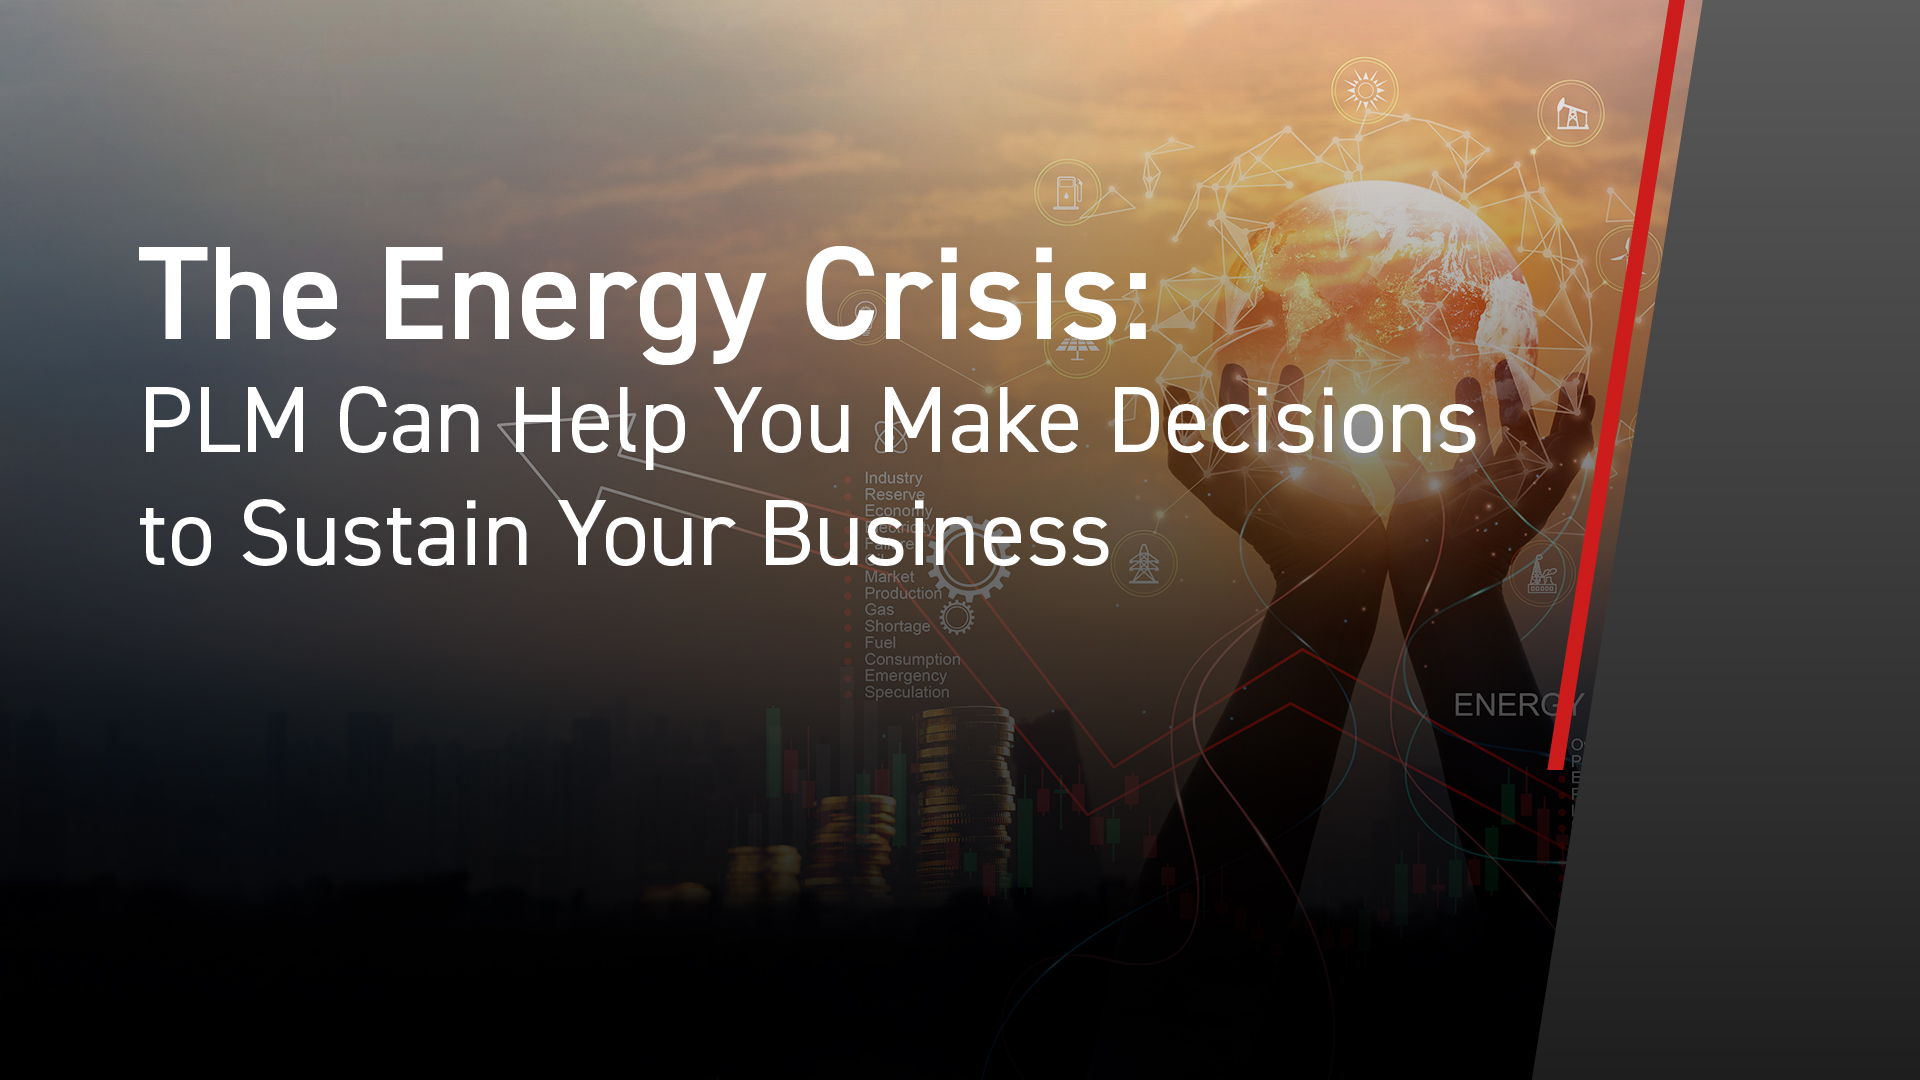 The Energy Crisis: PLM Can Help You Make Decisions that Sustain Business